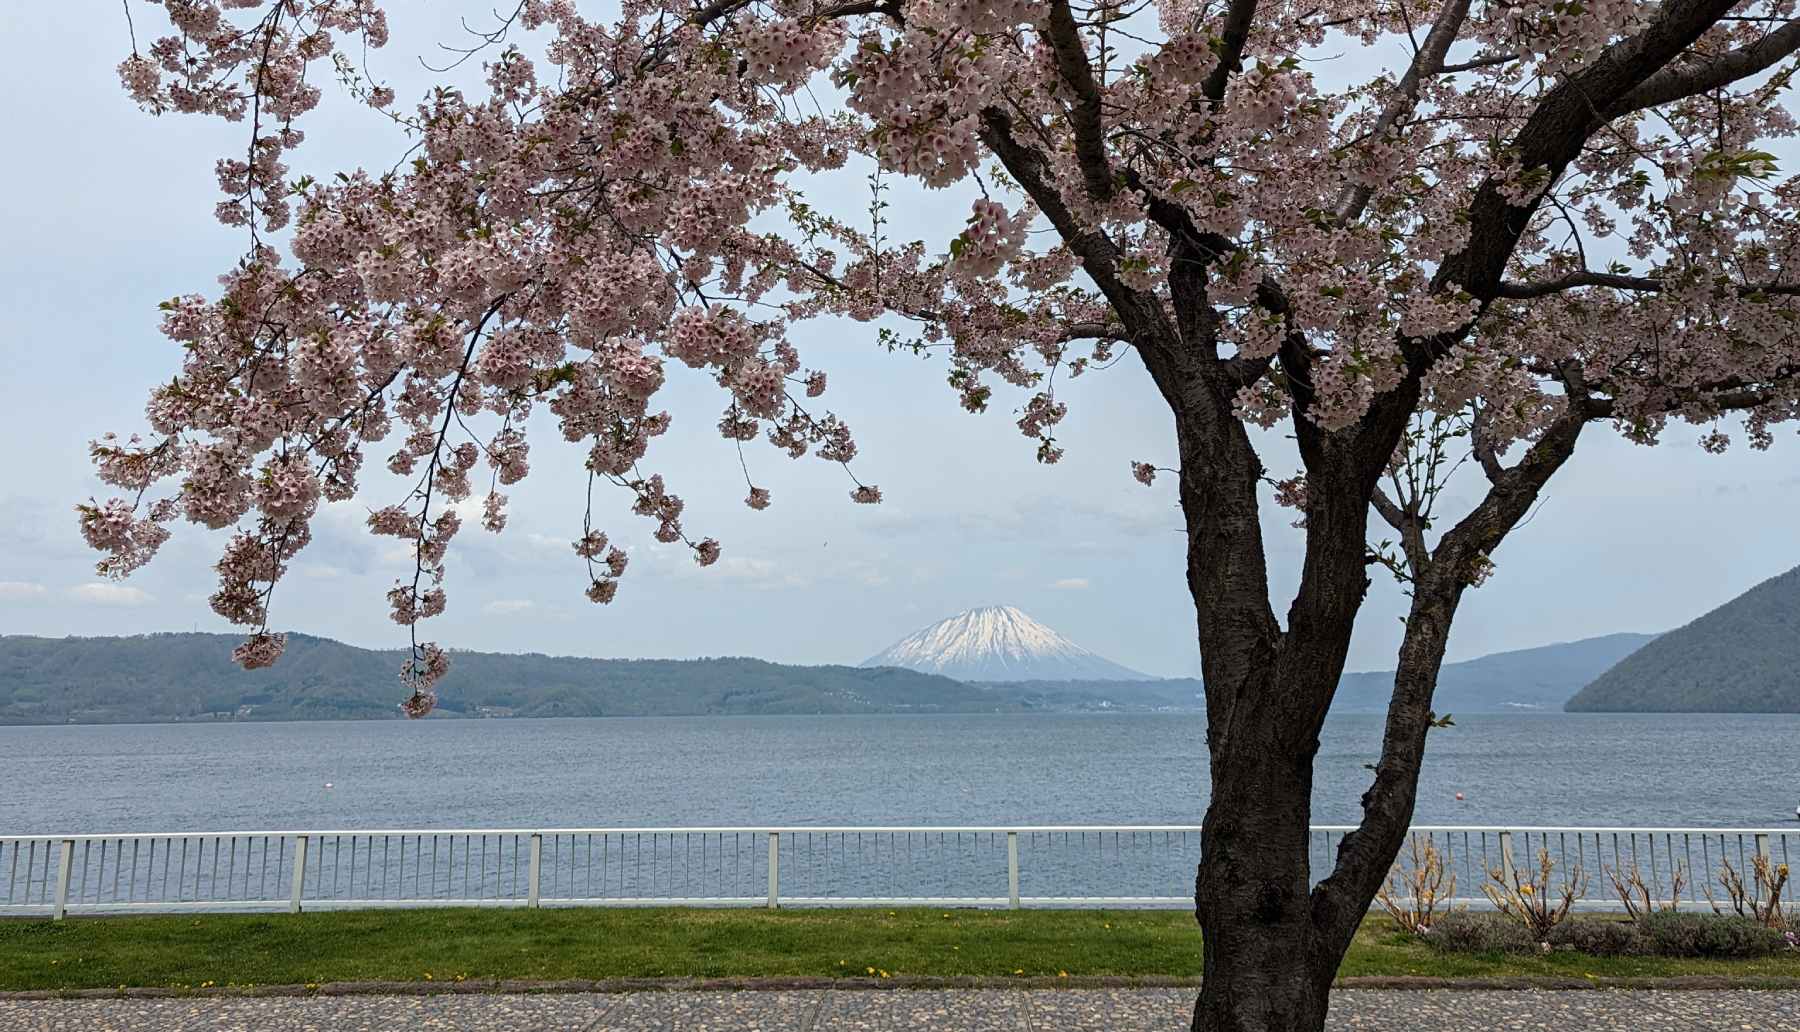 View across a lake, framed by the branches of a tree laden with cherry blossom. In the background is a snowy-peaked Mount Yōtei